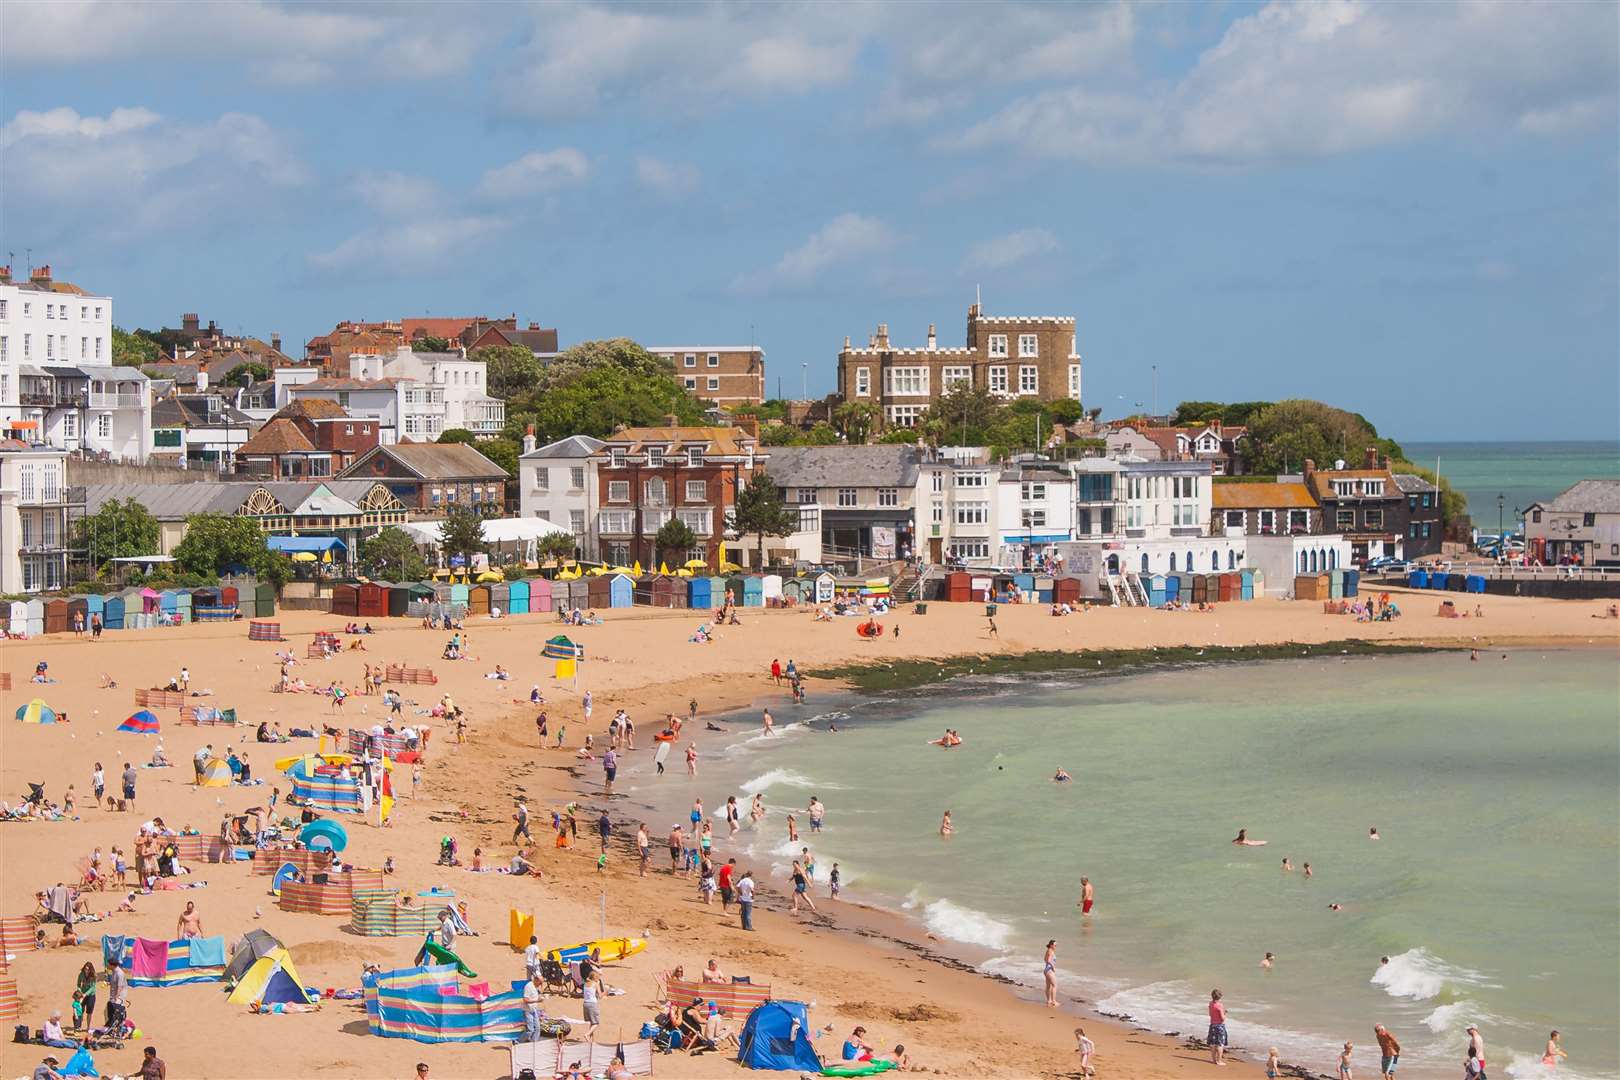 Broadstairs harbour and beach on the Isle of Thanet Picture: Southern Water